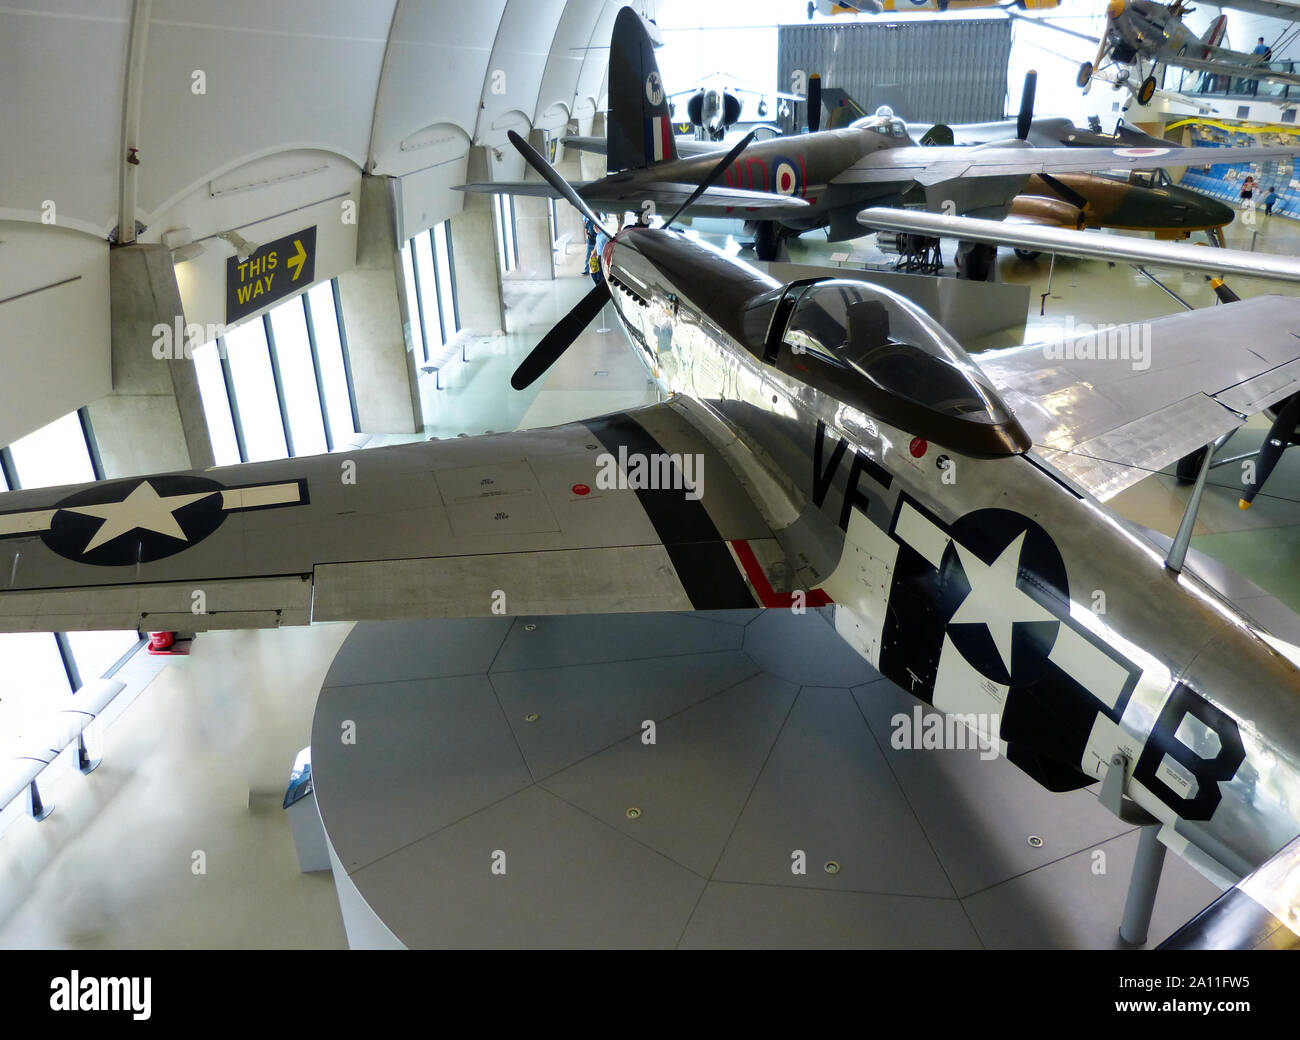 Royal Air Force (RAF) Museum / Hendon, London, UK - June 29, 2014: Real historic aircraft from all over the world on display: american Mustang P51 D Stock Photo